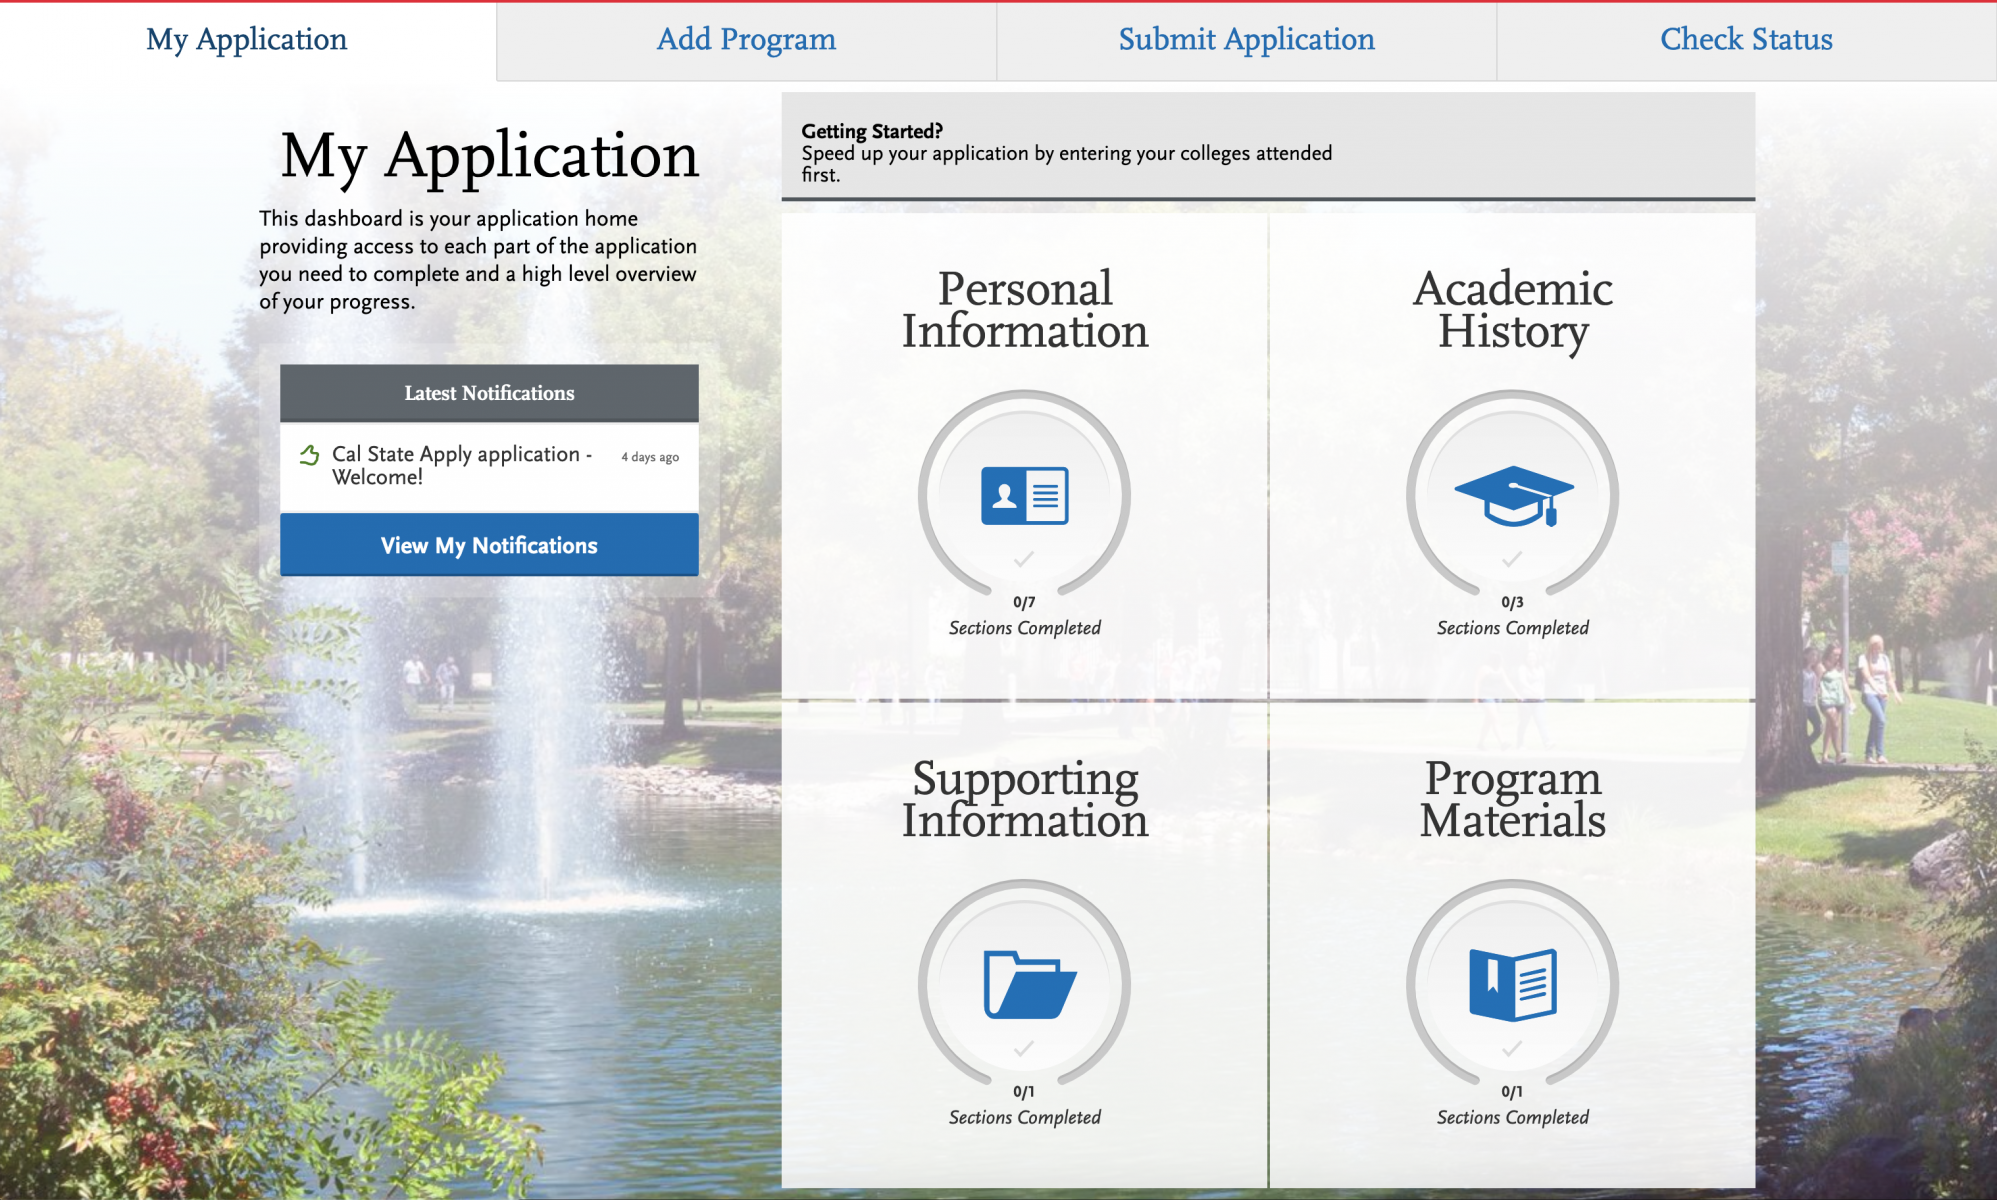 Complete all sections of your application